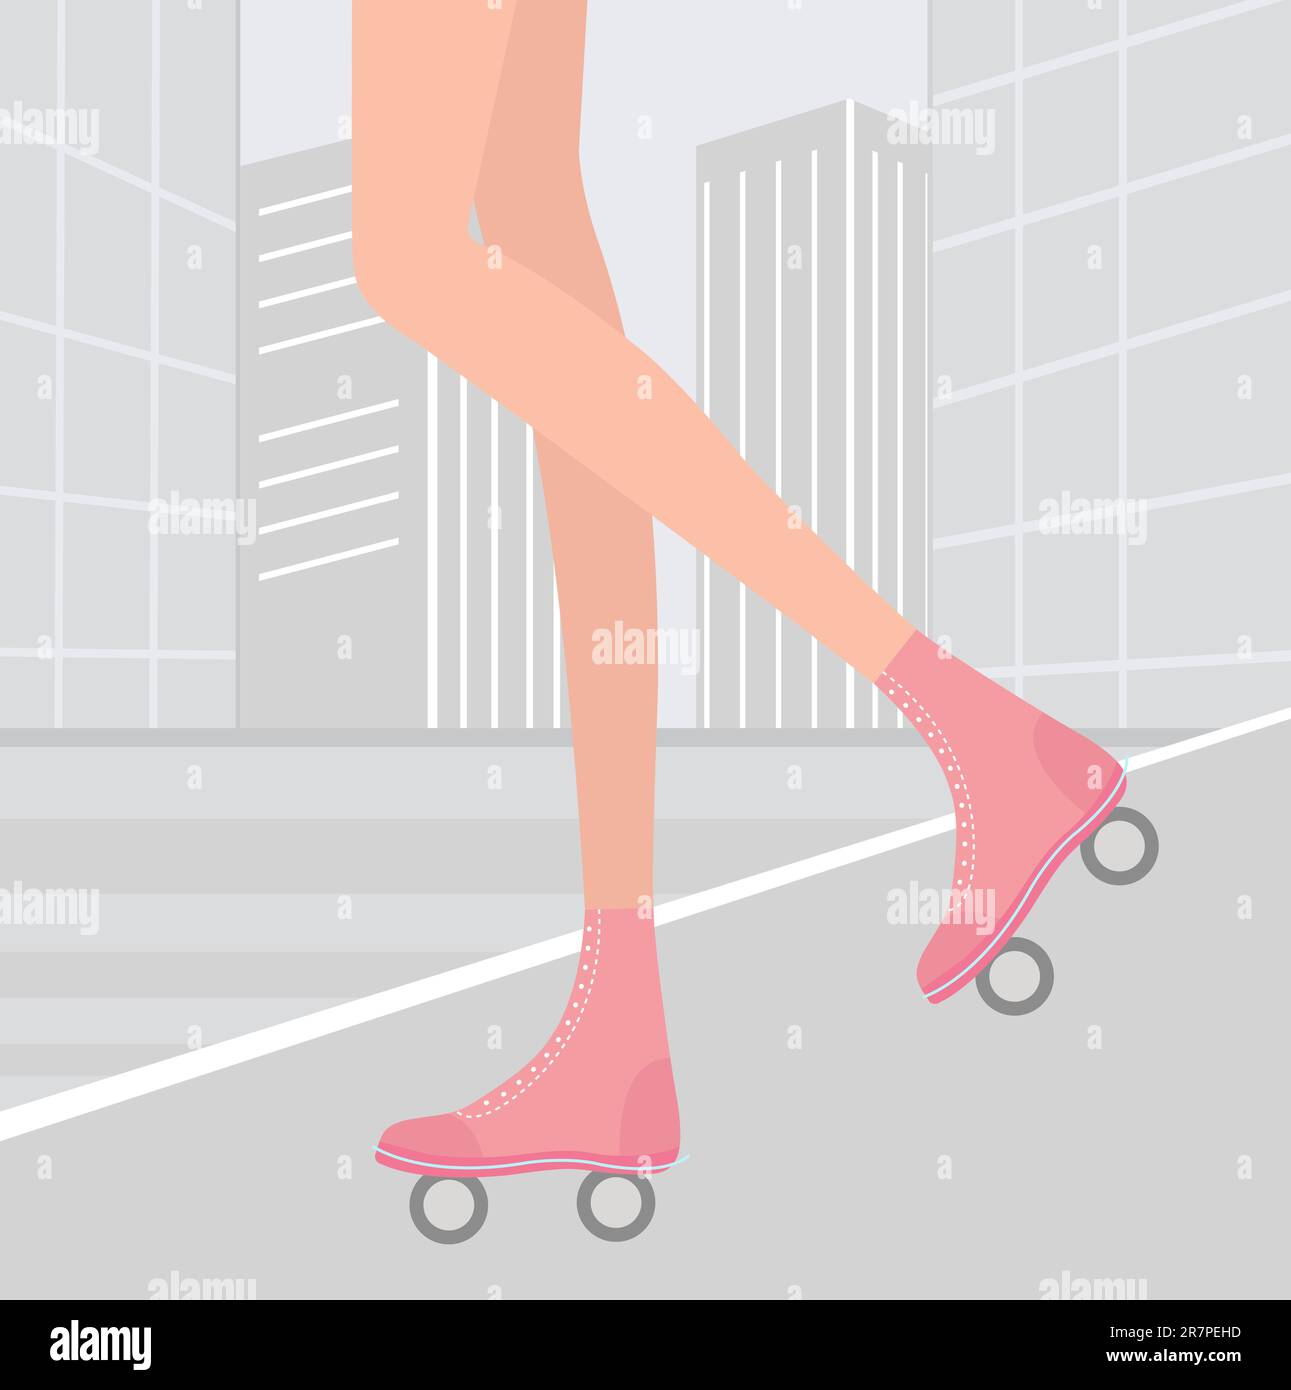 Roller skating in a city Stock Vector